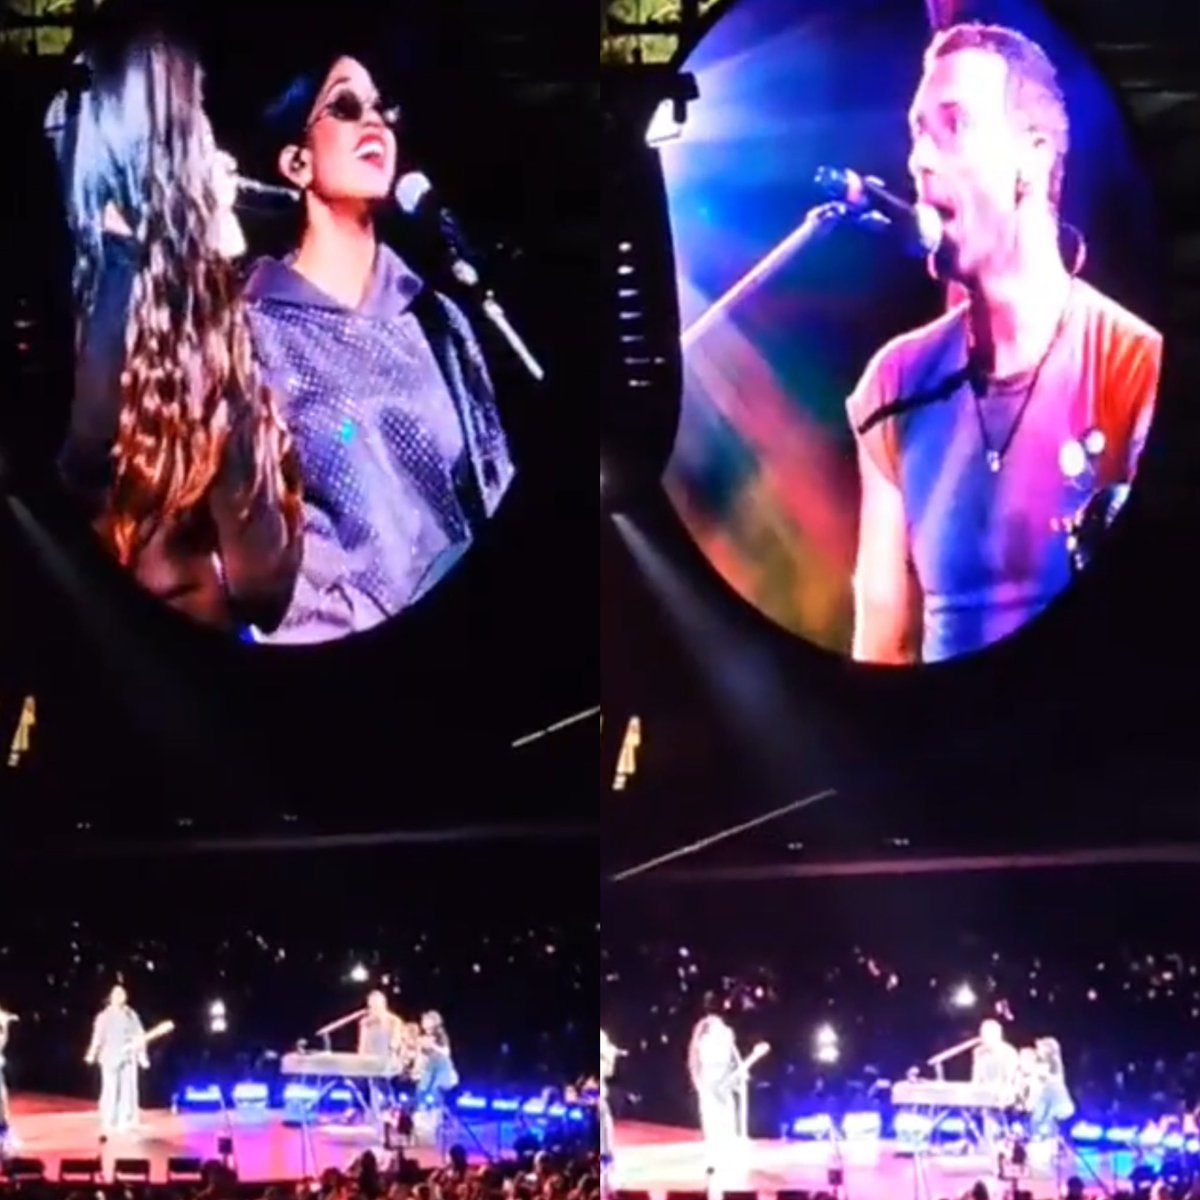 Selena Gomez joins Coldplay and H.E.R. for a surprise performance of ‘Let Somebody Go’ in LA.